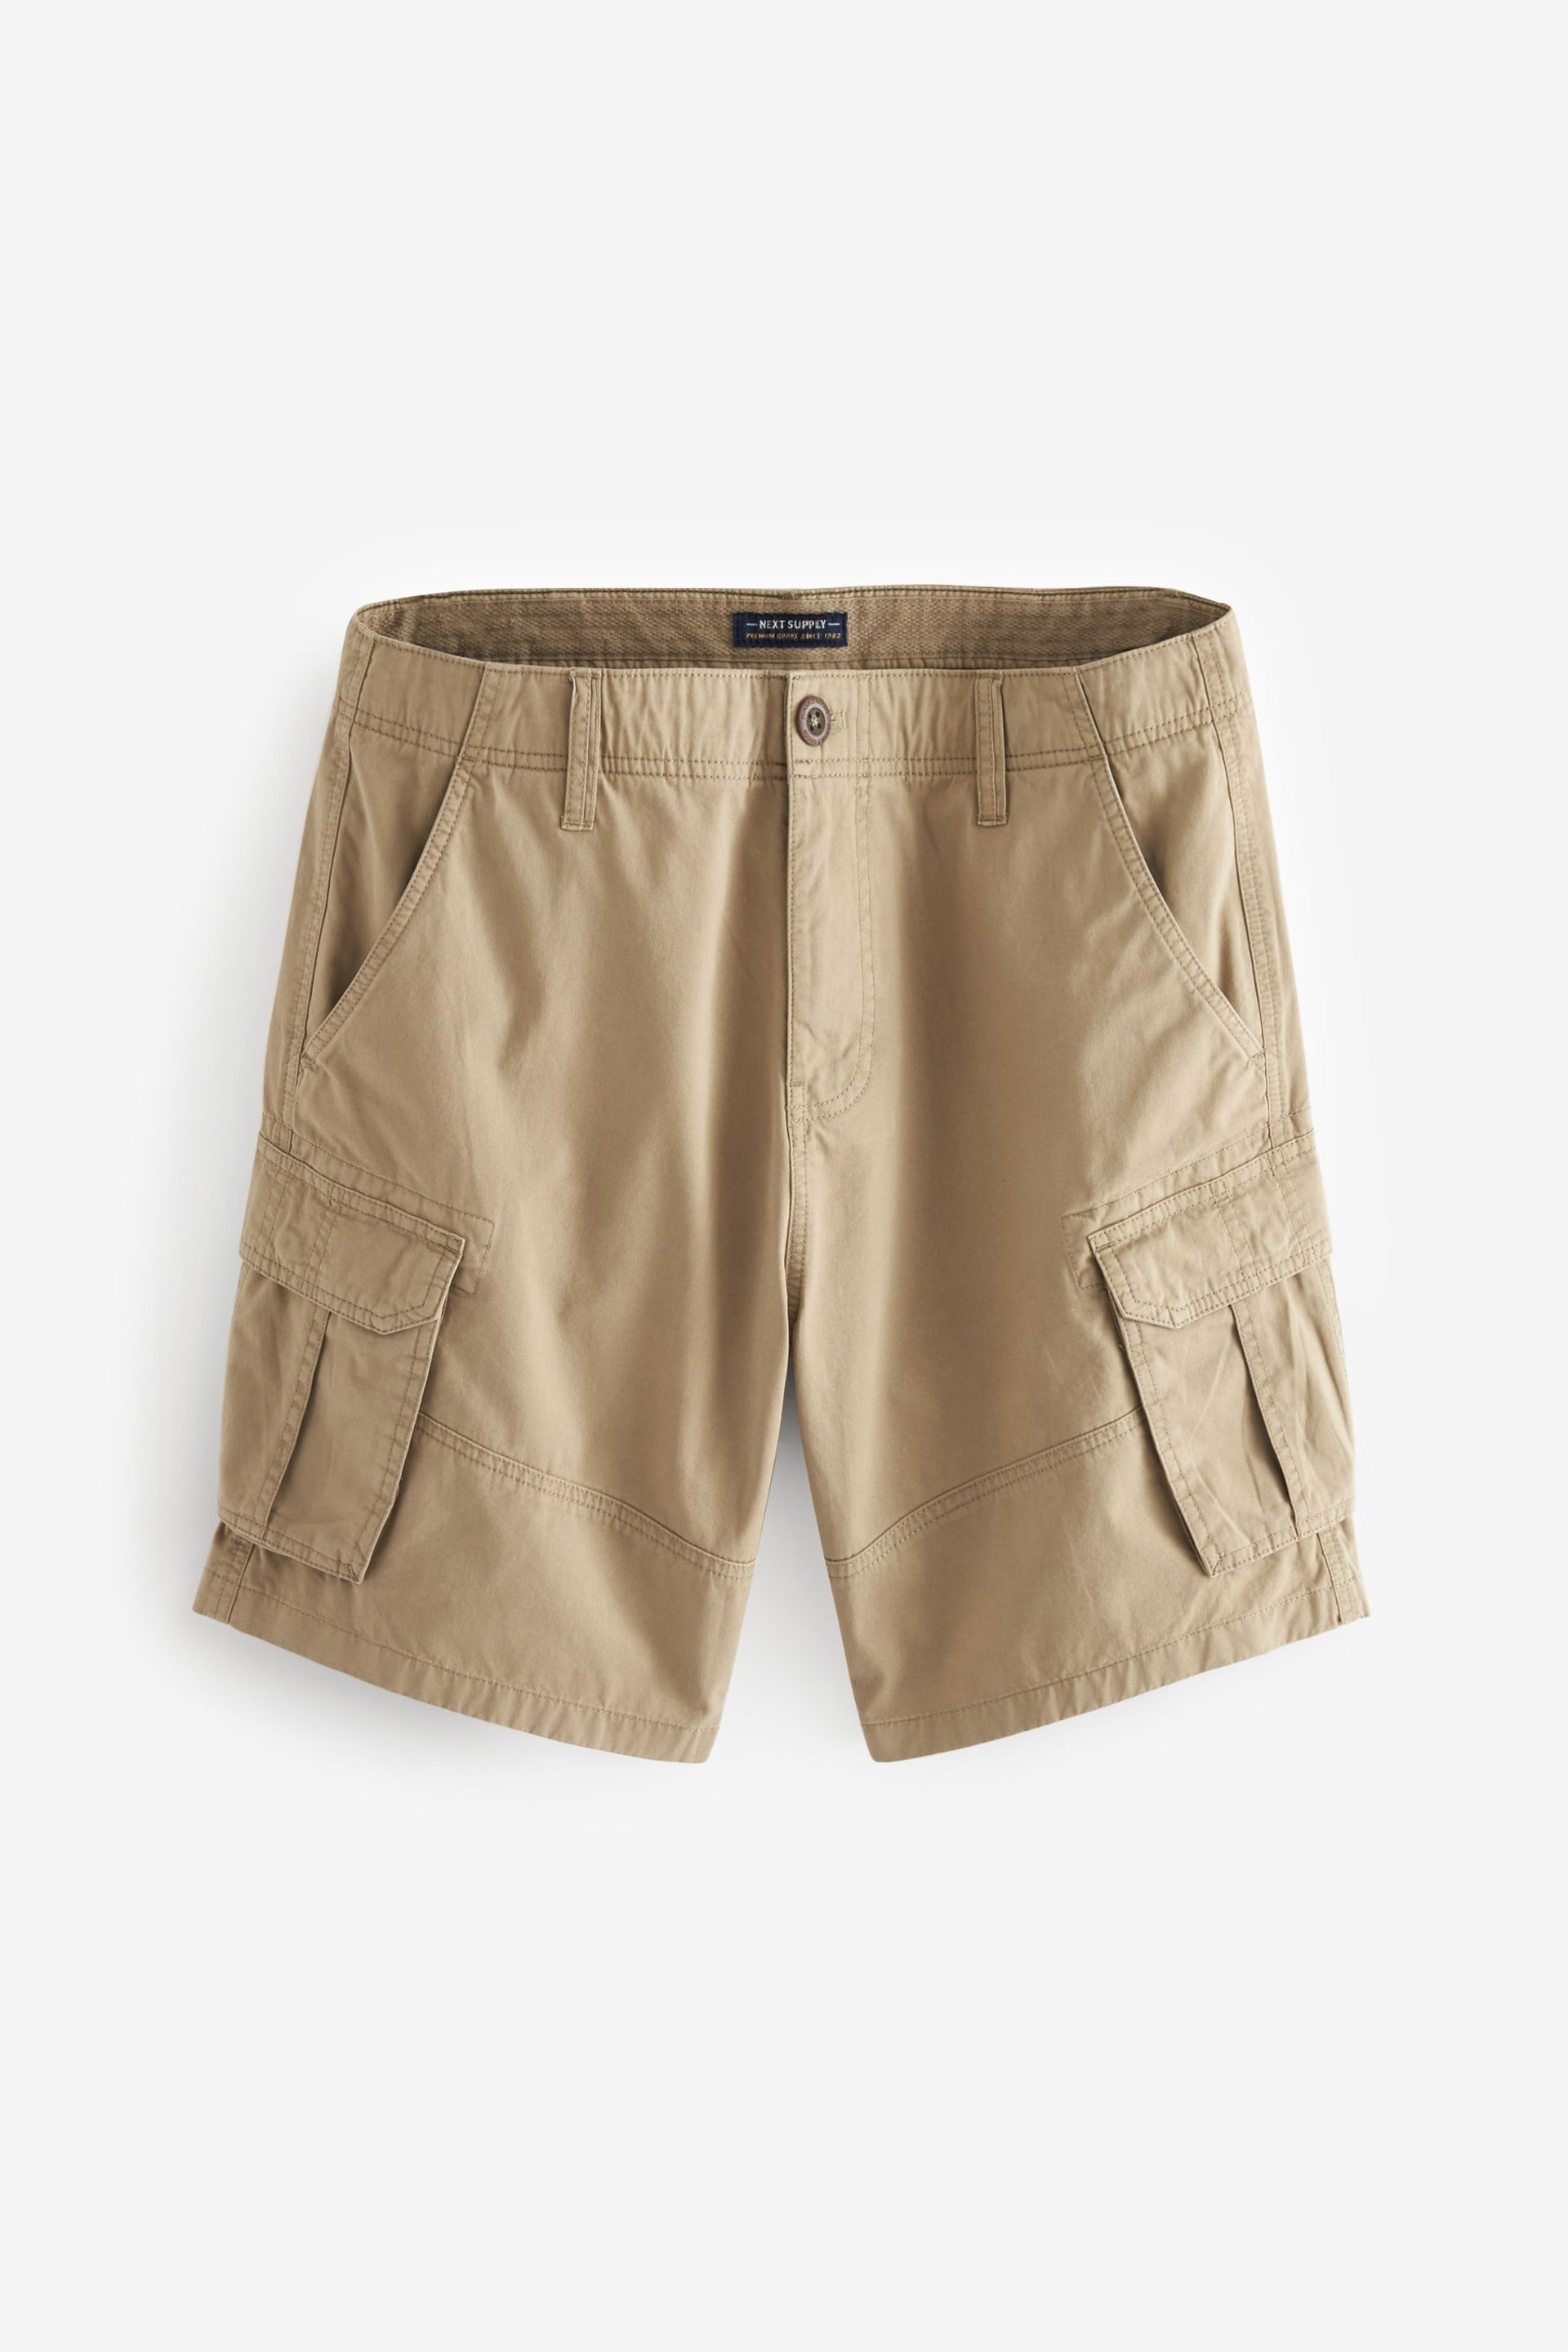 Navy Blue/Stone Natural Cargo Shorts 2 Pack - Image 9 of 13